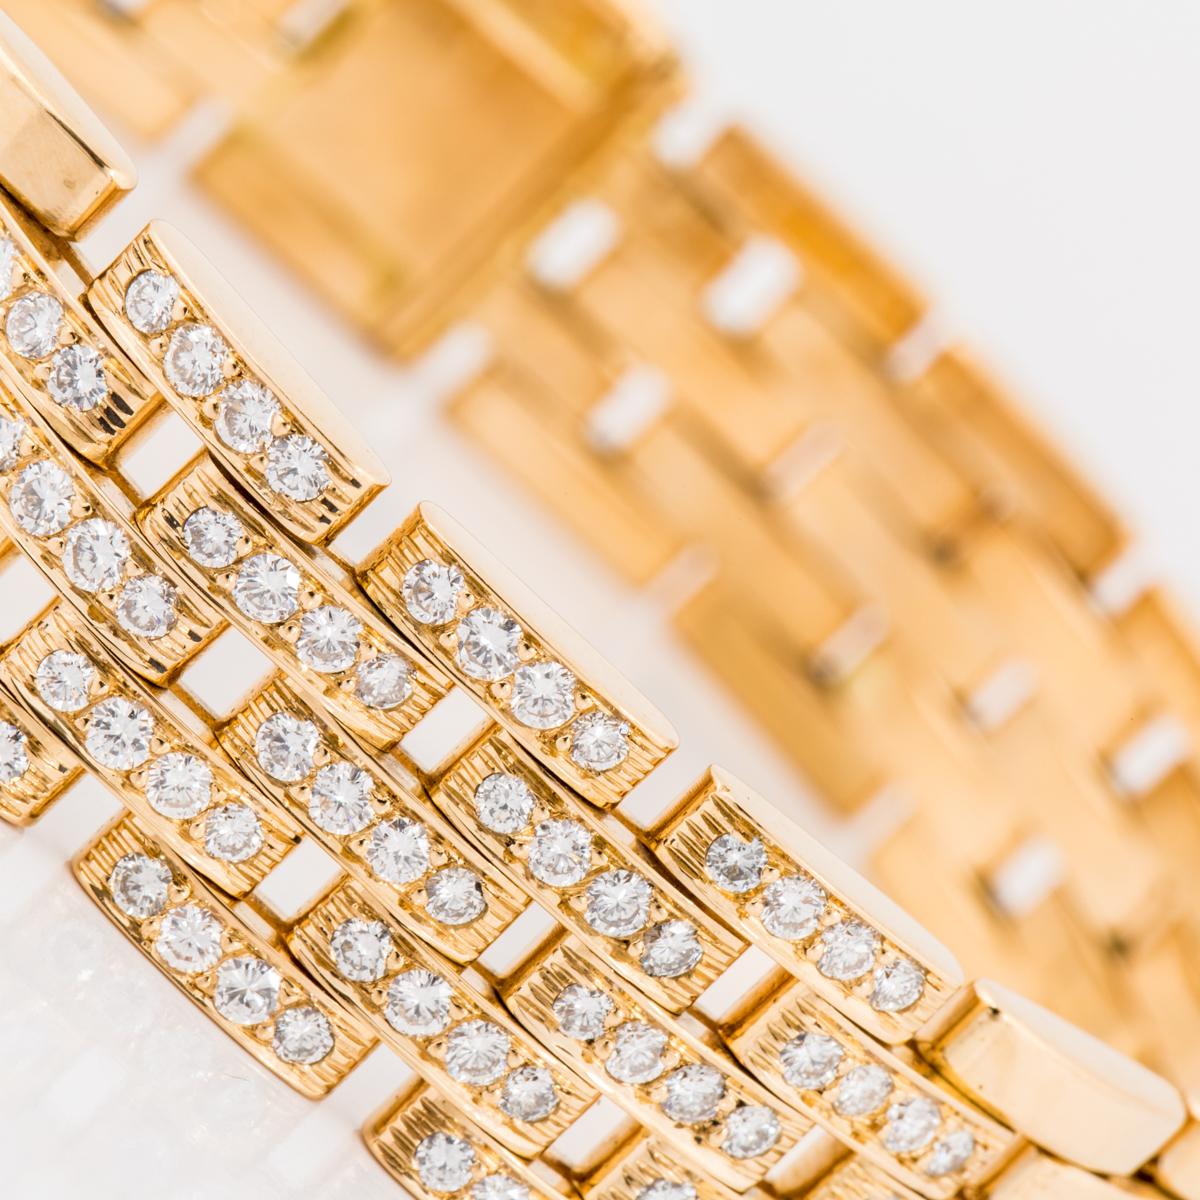 Cartier Maillon Panthère five-row gold link bracelet in 18K yellow gold with round brilliant-cut diamonds. The center portion has 19 links that are pavé-set with four diamonds each totaling 1.88 carats of diamonds, F-G color, VVS-VS clarity. The